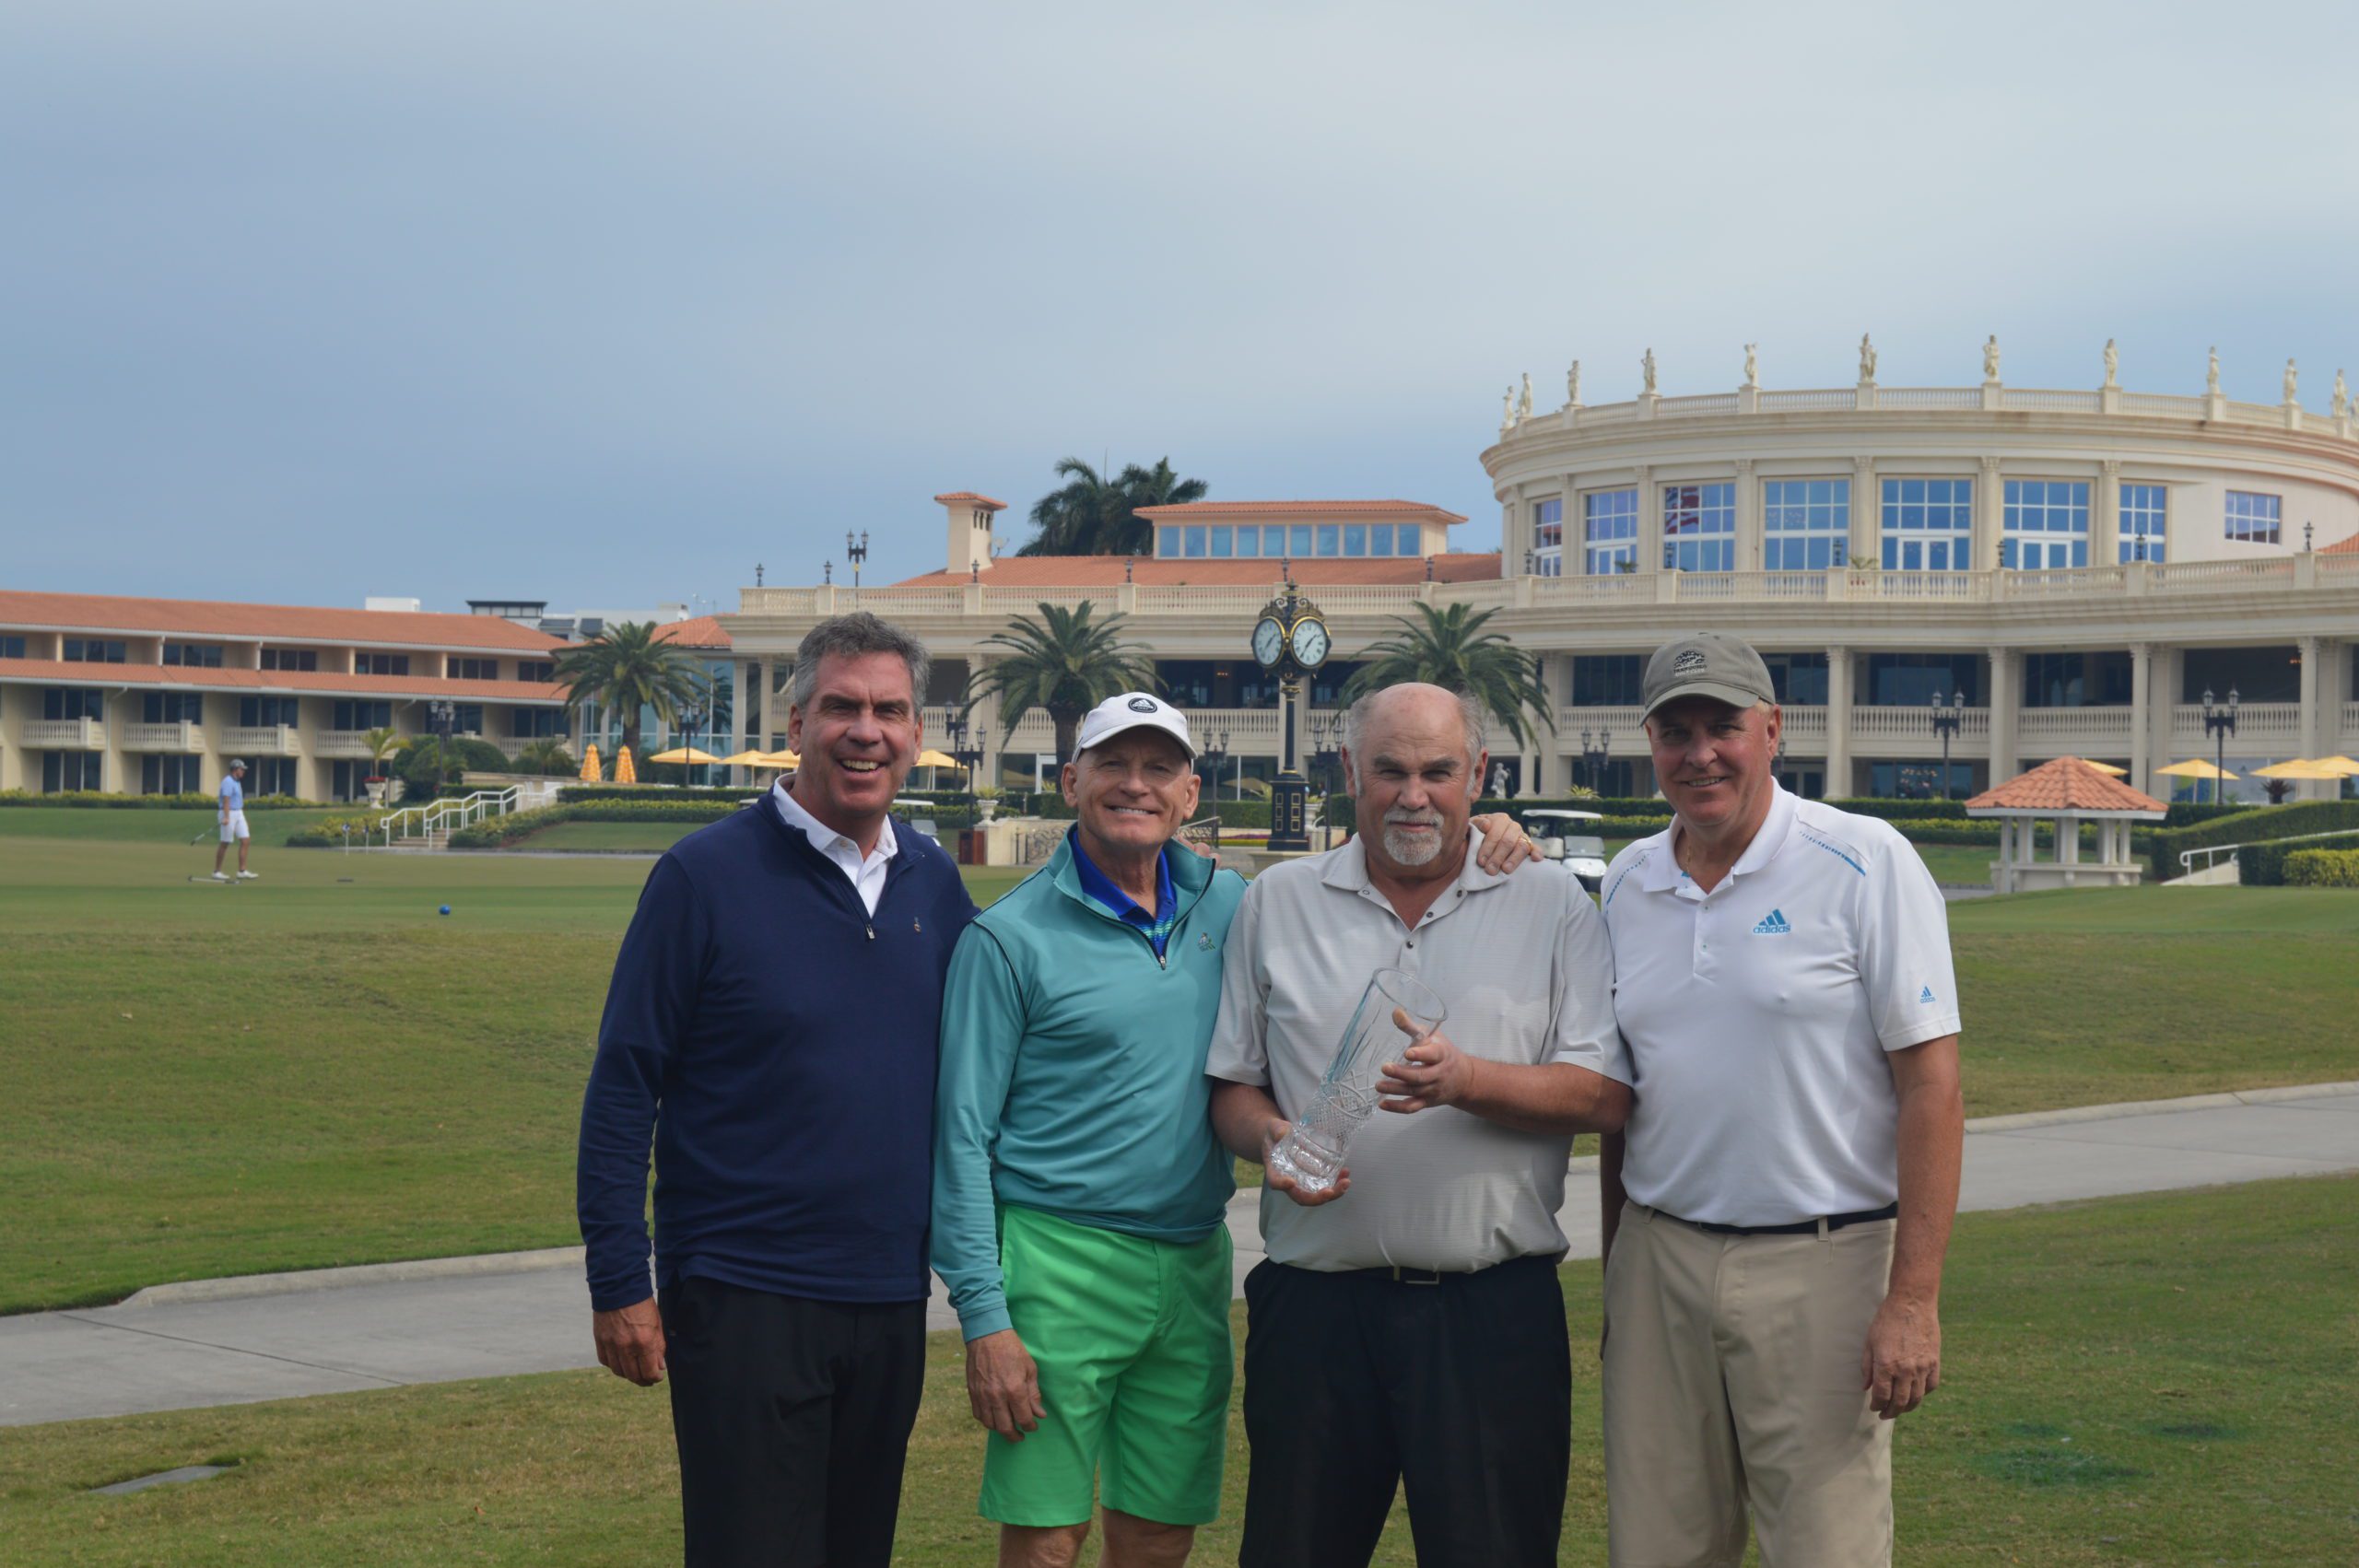 Team from Carls Golfland wins the Michigan PGA Trump Doral Pro Am presented by Linksoul